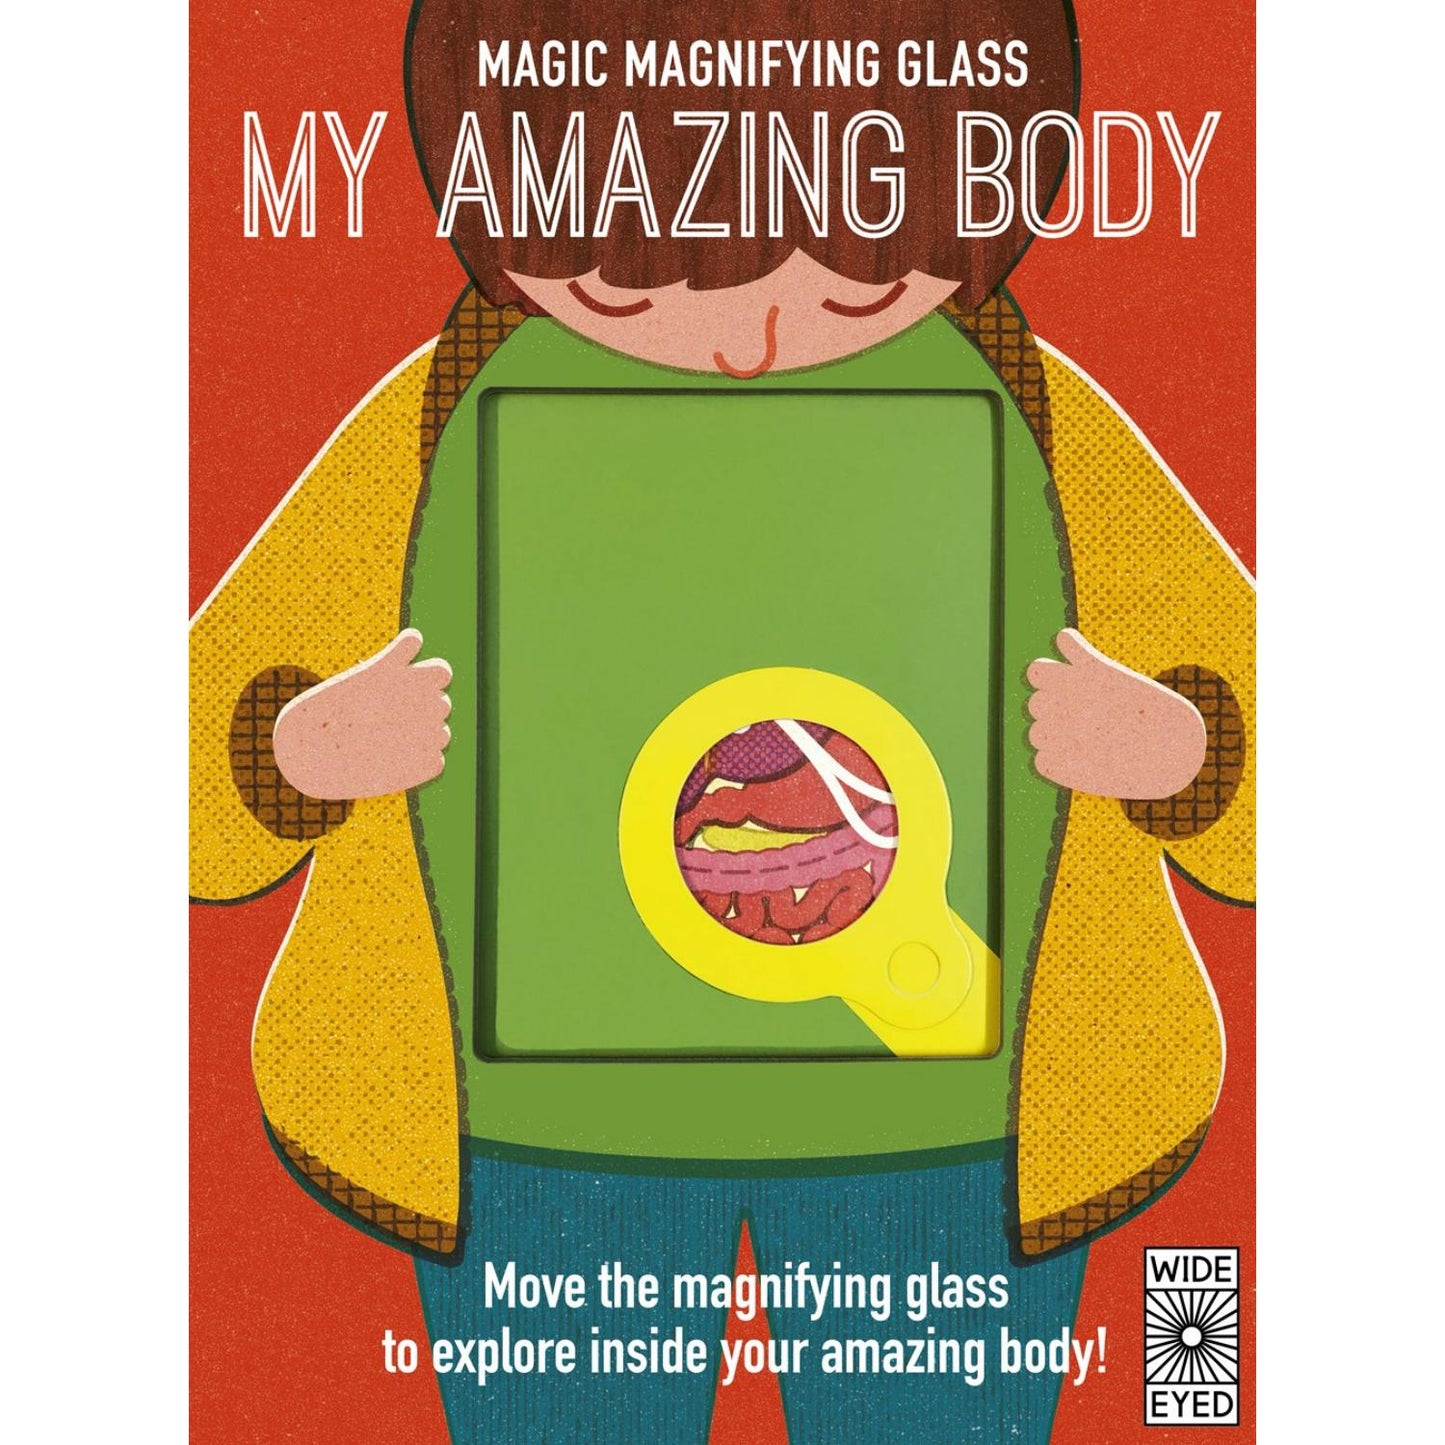 My Amazing Body - Magic Magnifying Glass | Hardcover | Children’s Book on the Human Body